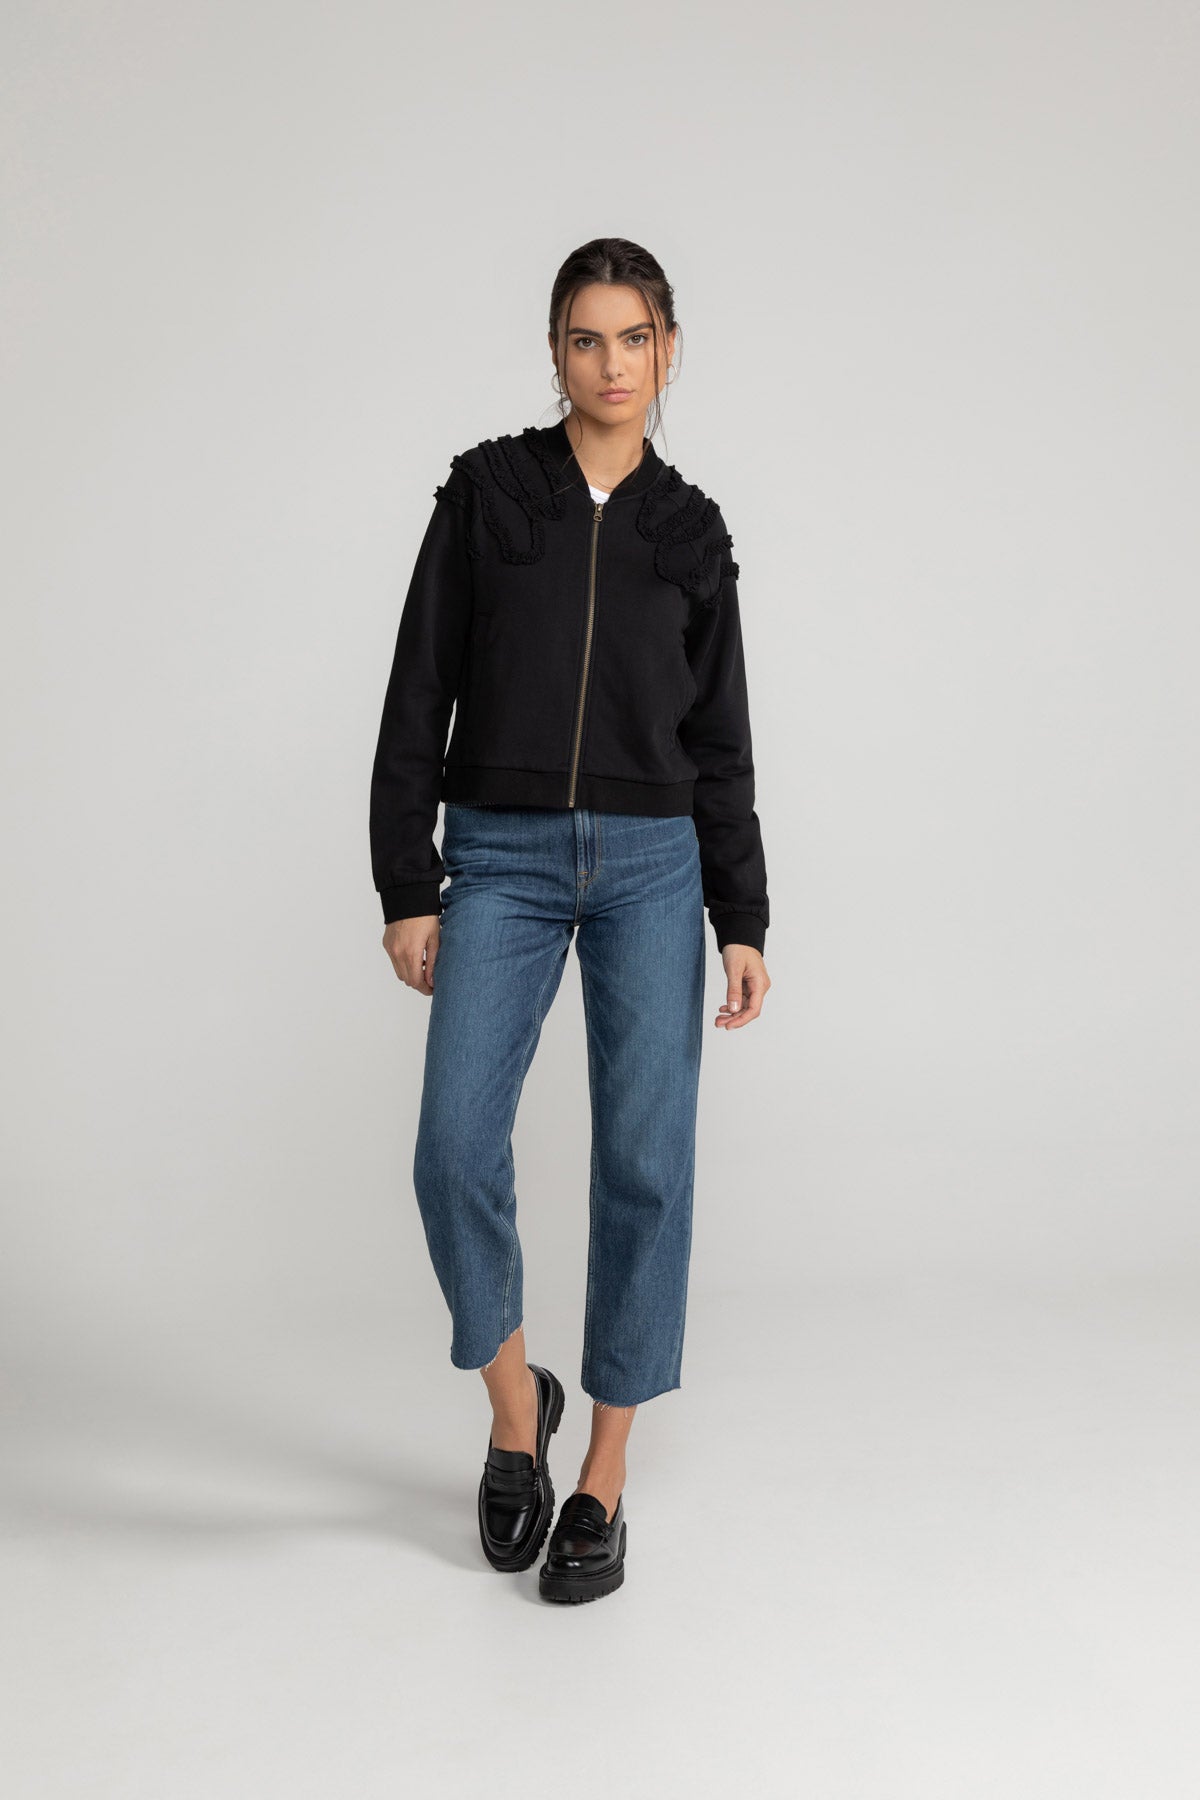 Endellion sweat bomber jacket in black from LOVJOI made of organic cotton